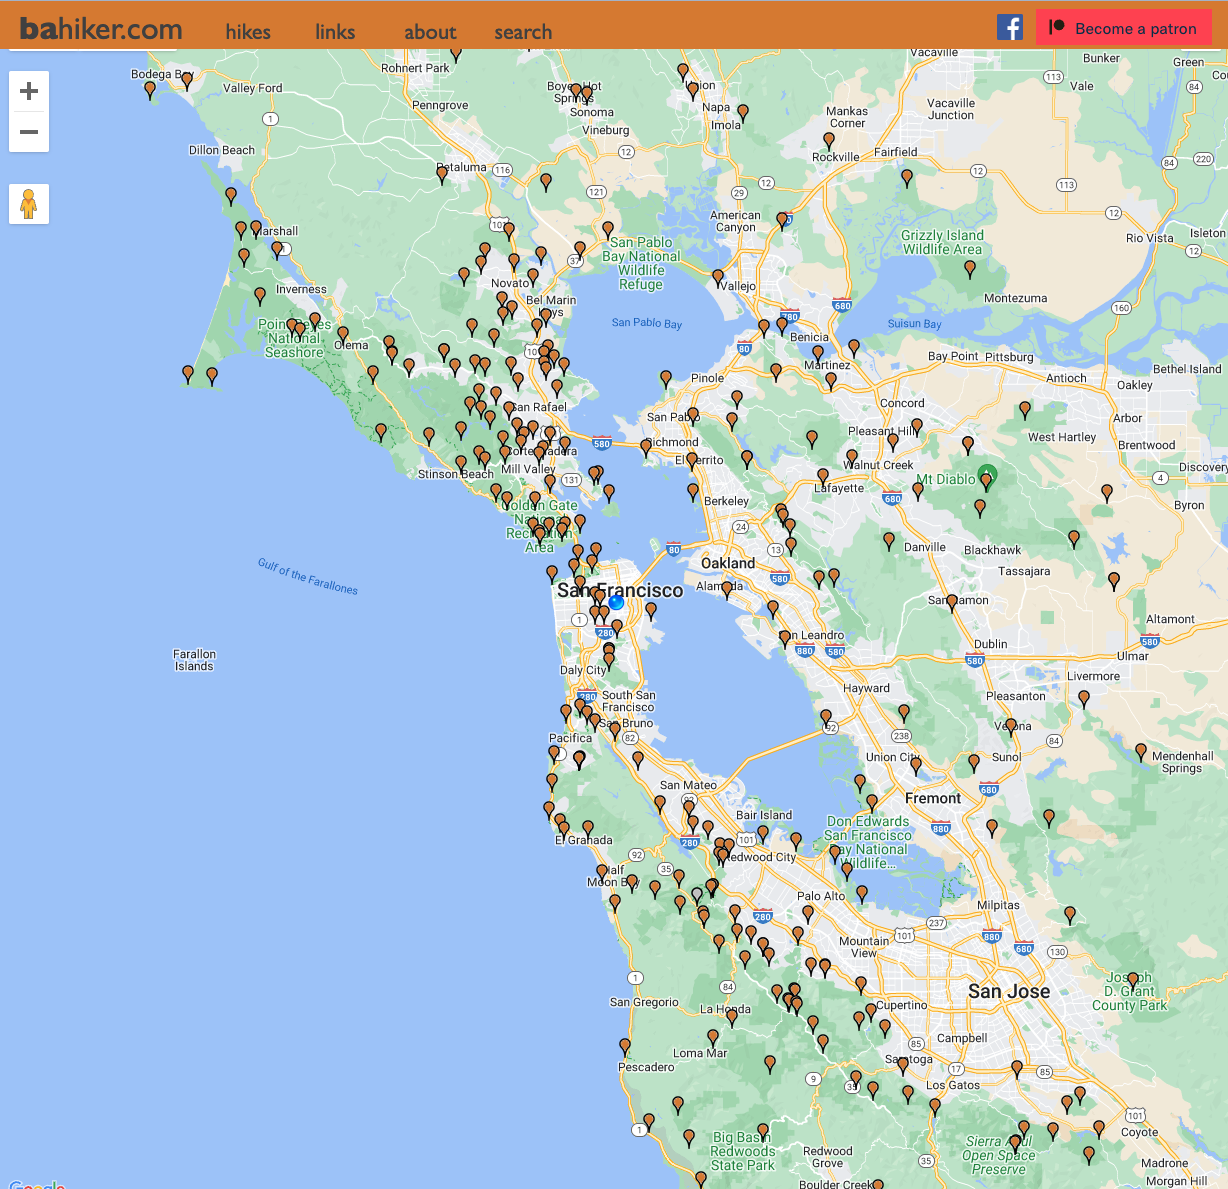 A map showing hiking trails around San Francisco with many icons indicating different locations.